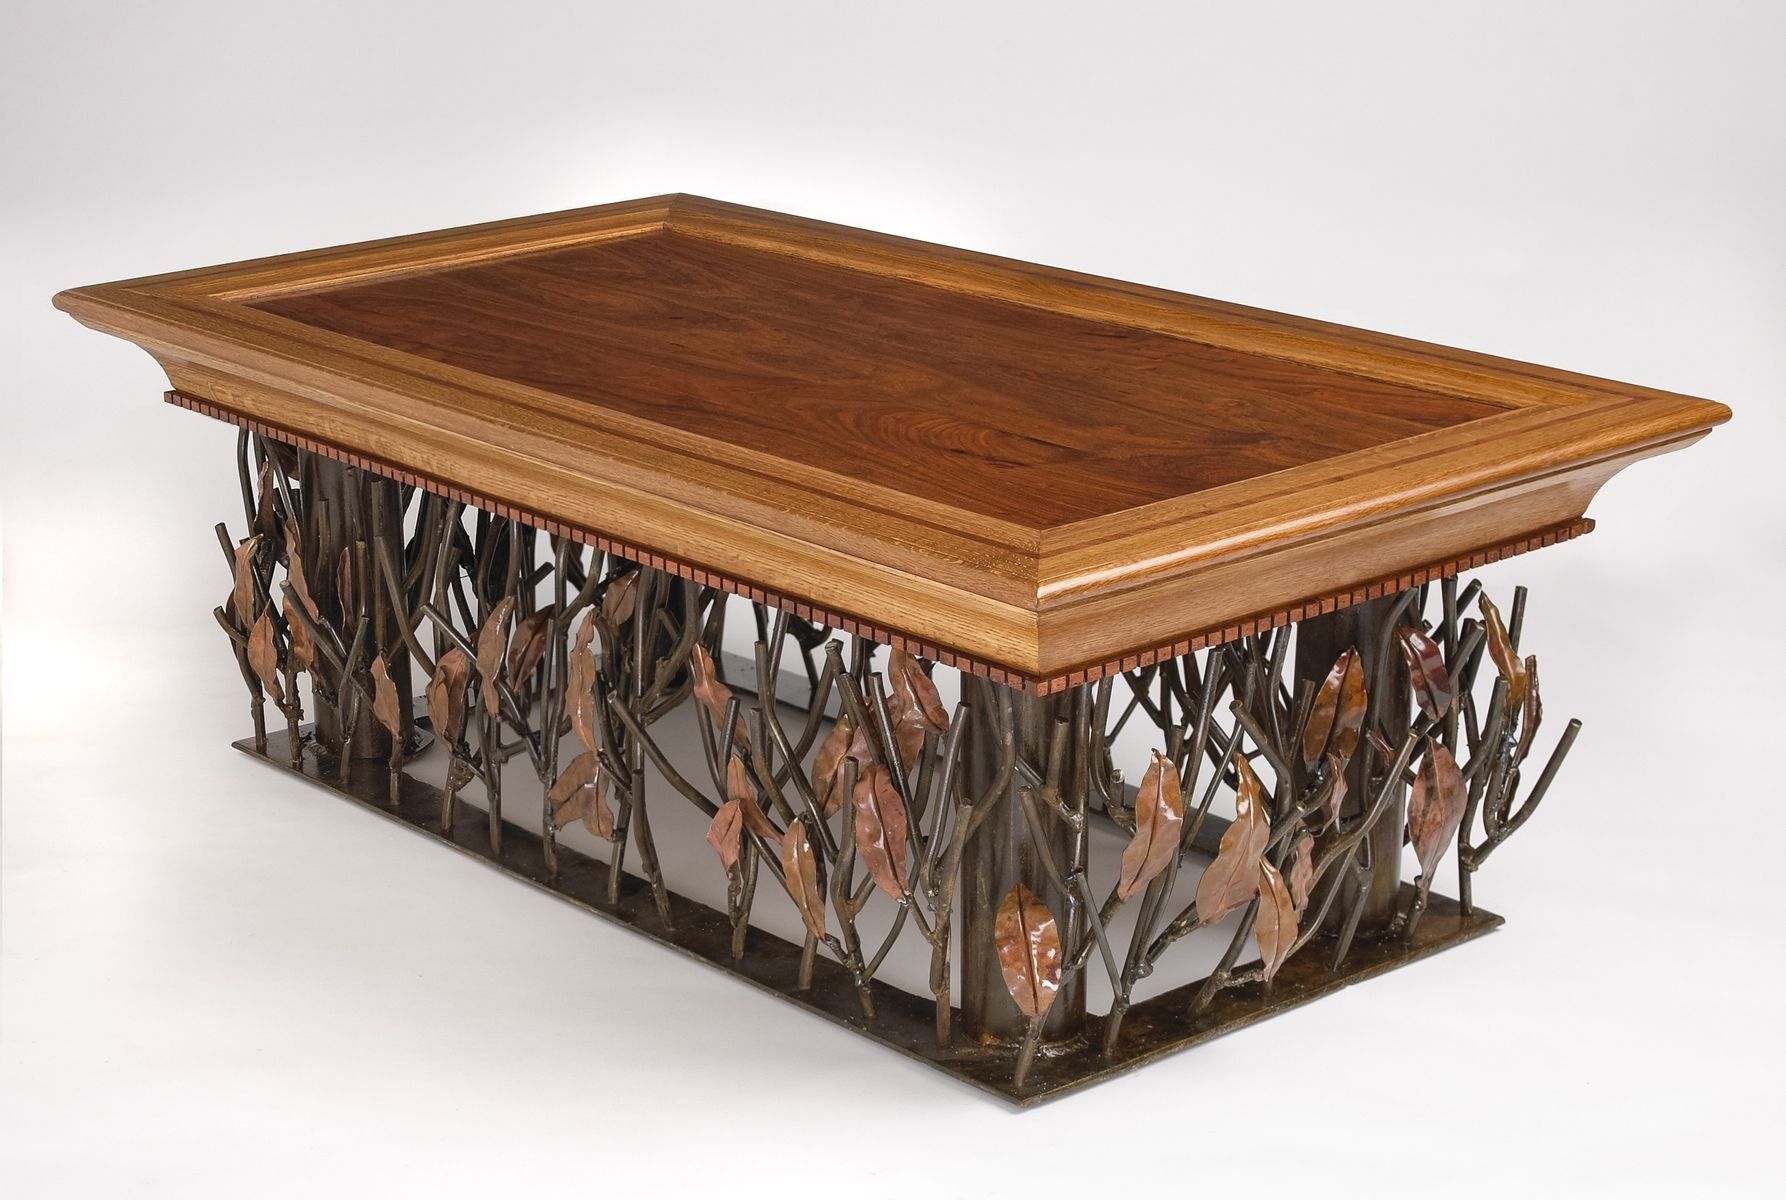 Hand Crafted Mesquite, Steel And Copper Coffee Tablerandy White Intended For Regency Cain Steel Coffee Tables (View 21 of 21)